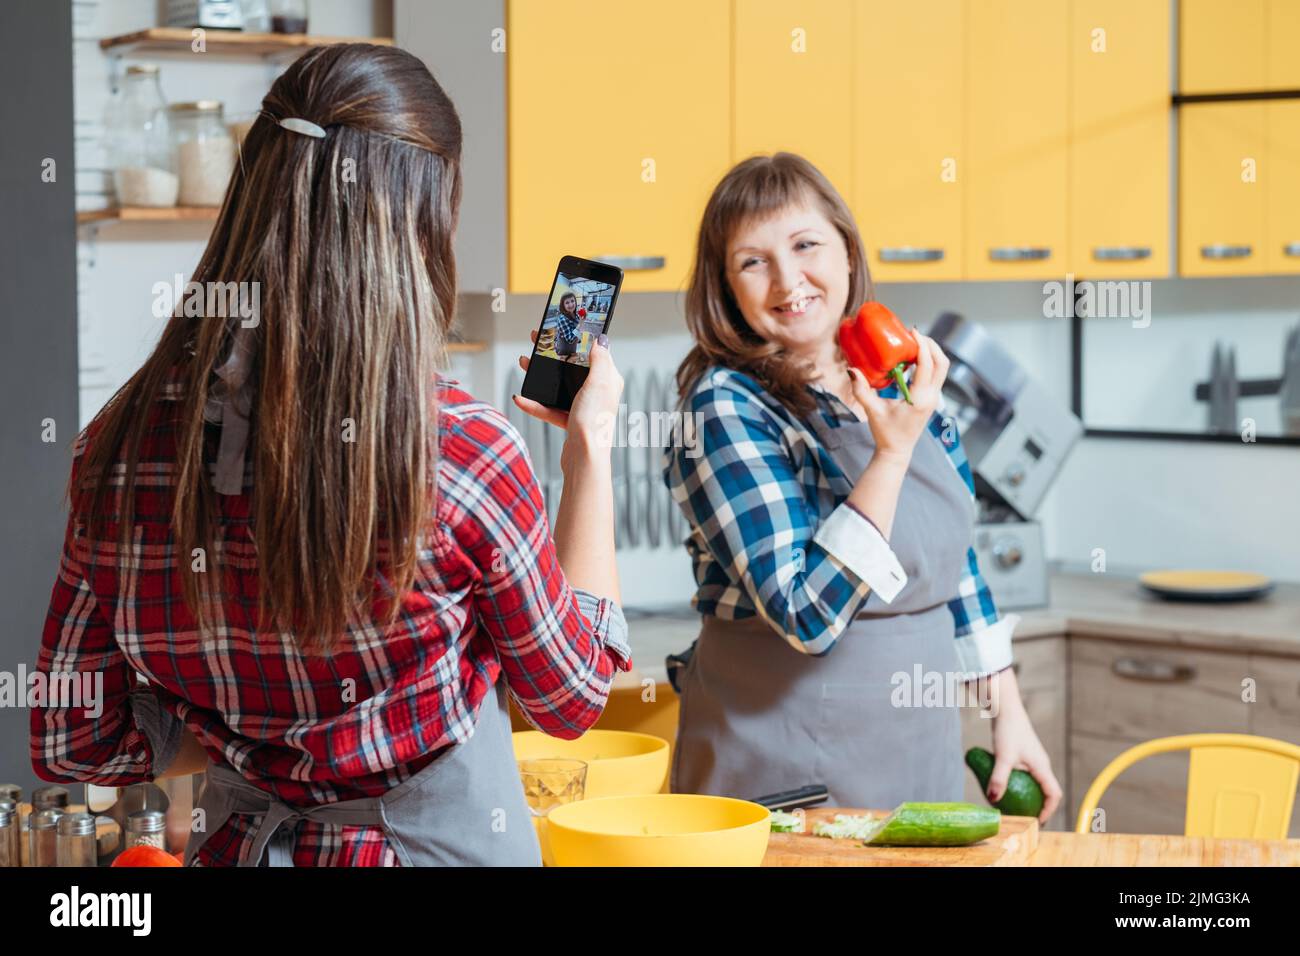 family cooking blog women healthy lifestyle diet Stock Photo